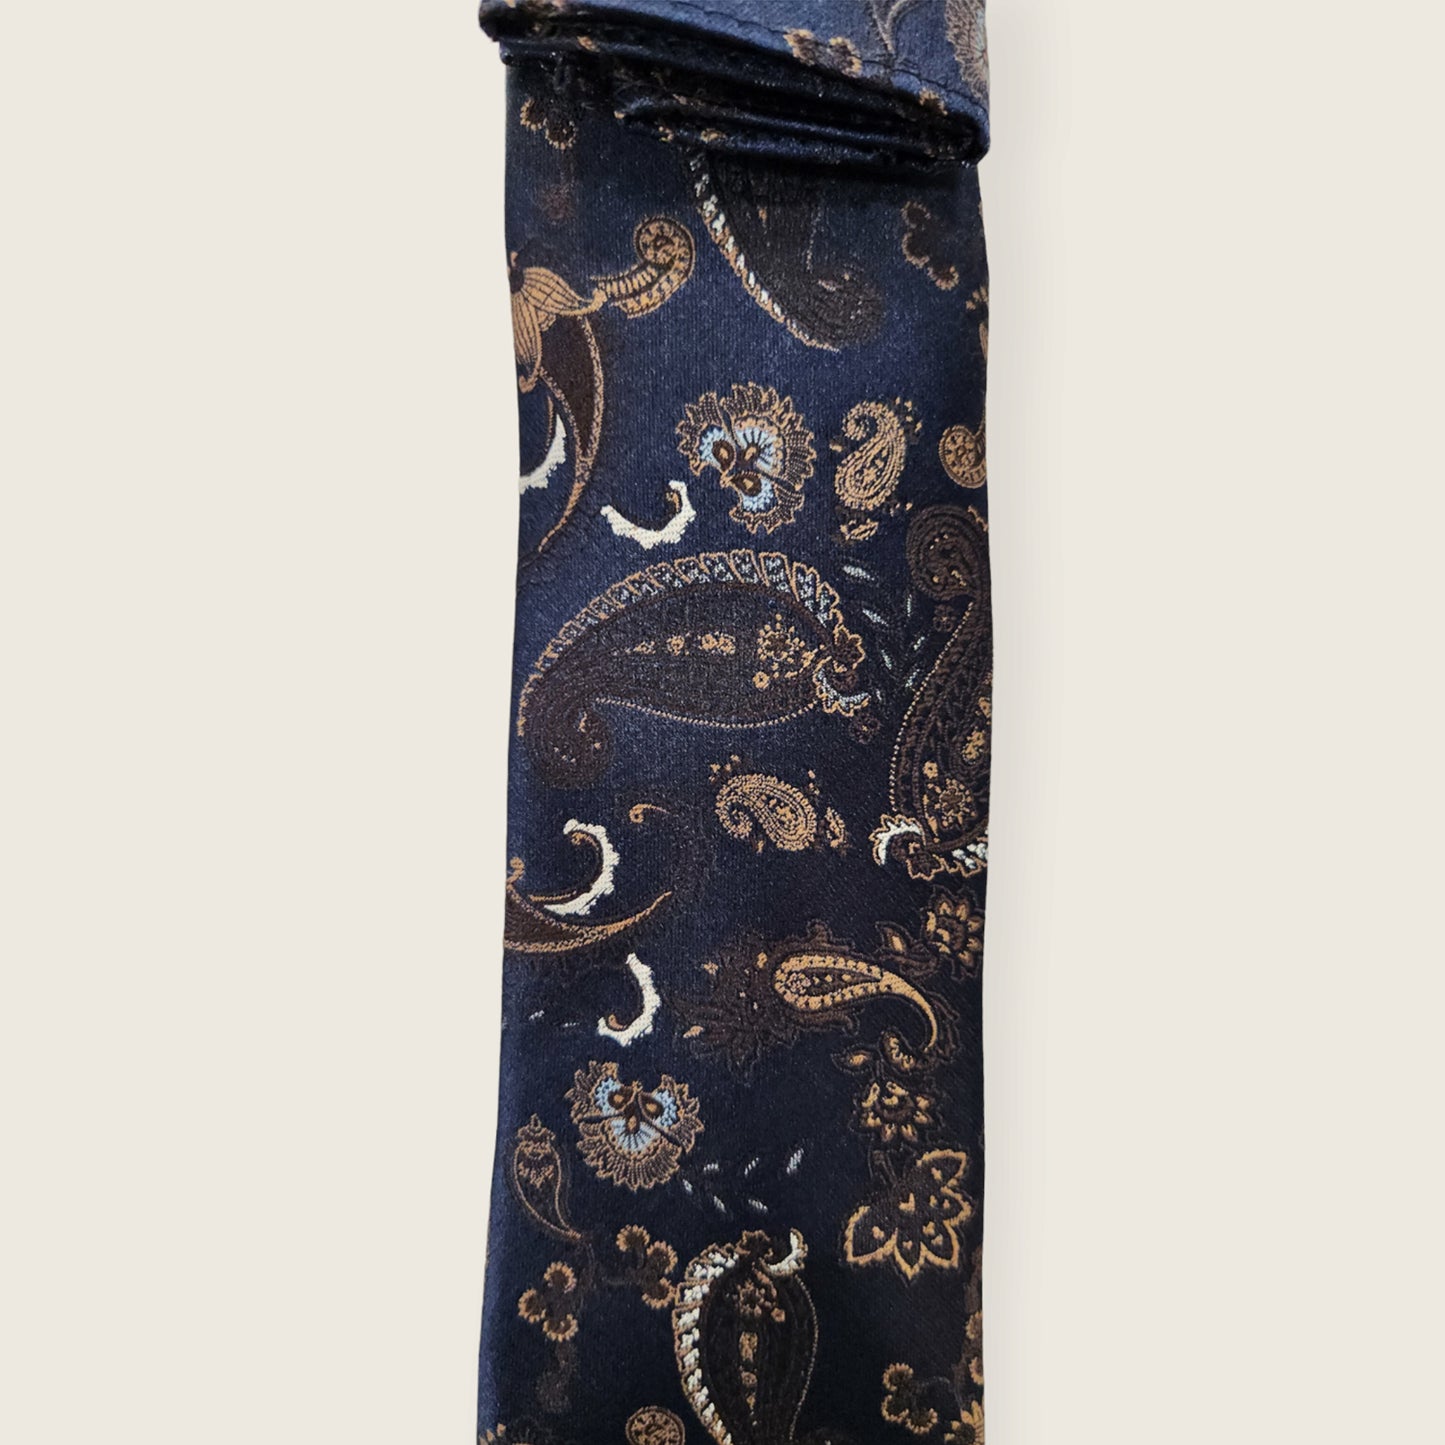 Tie and Hankie Set - Paisley Navy and Brown I172623